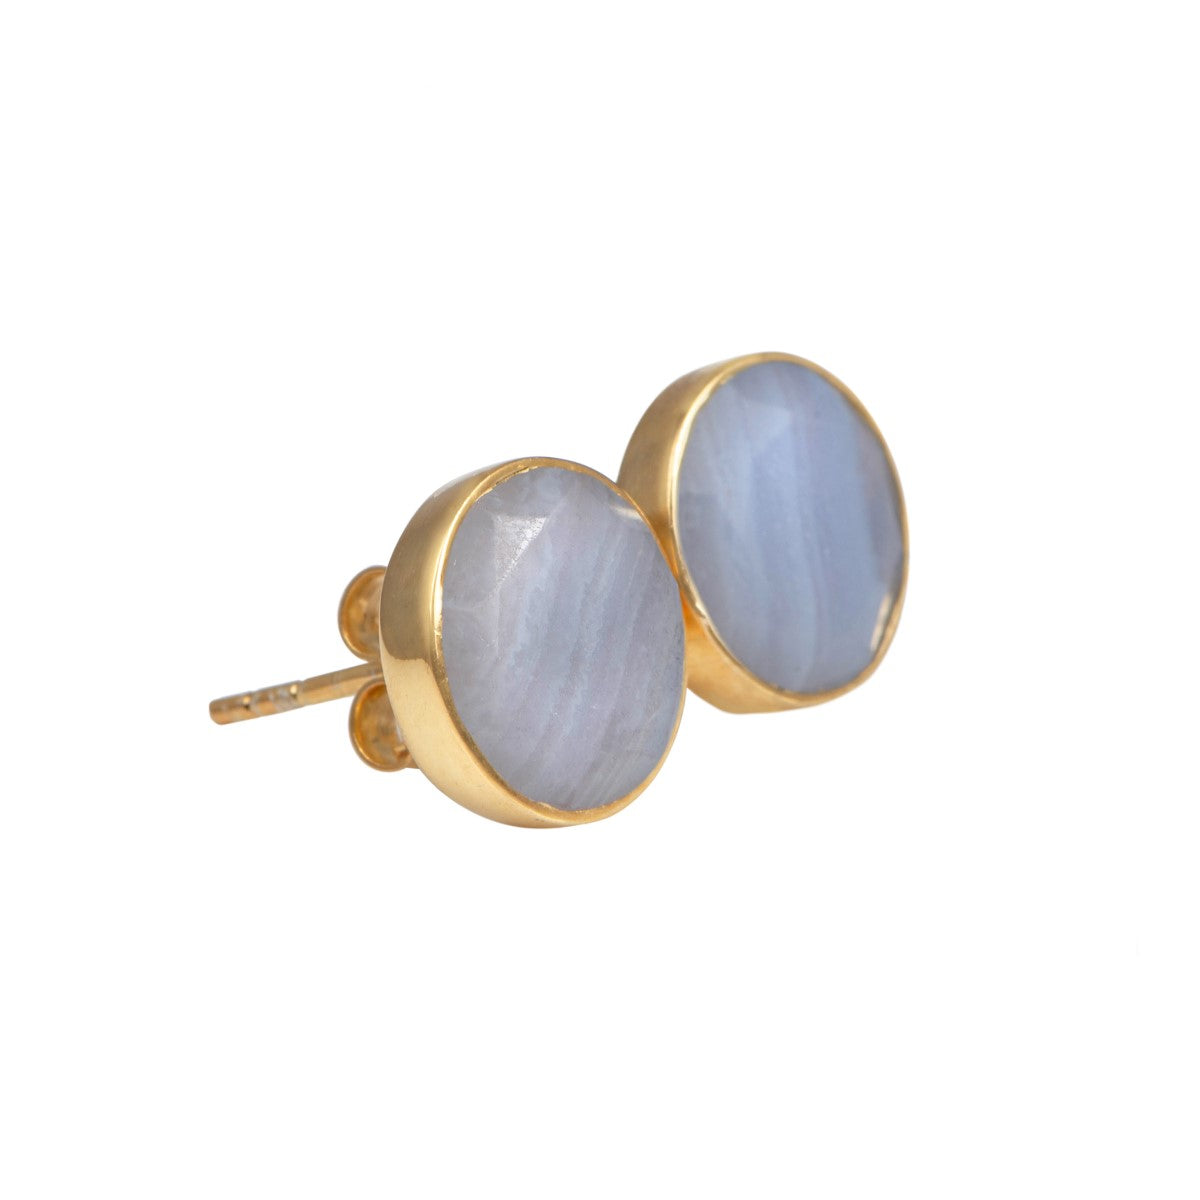 Blue Laced Agate Studs in Gold Plated Sterling Silver with a Round Faceted Gemstone